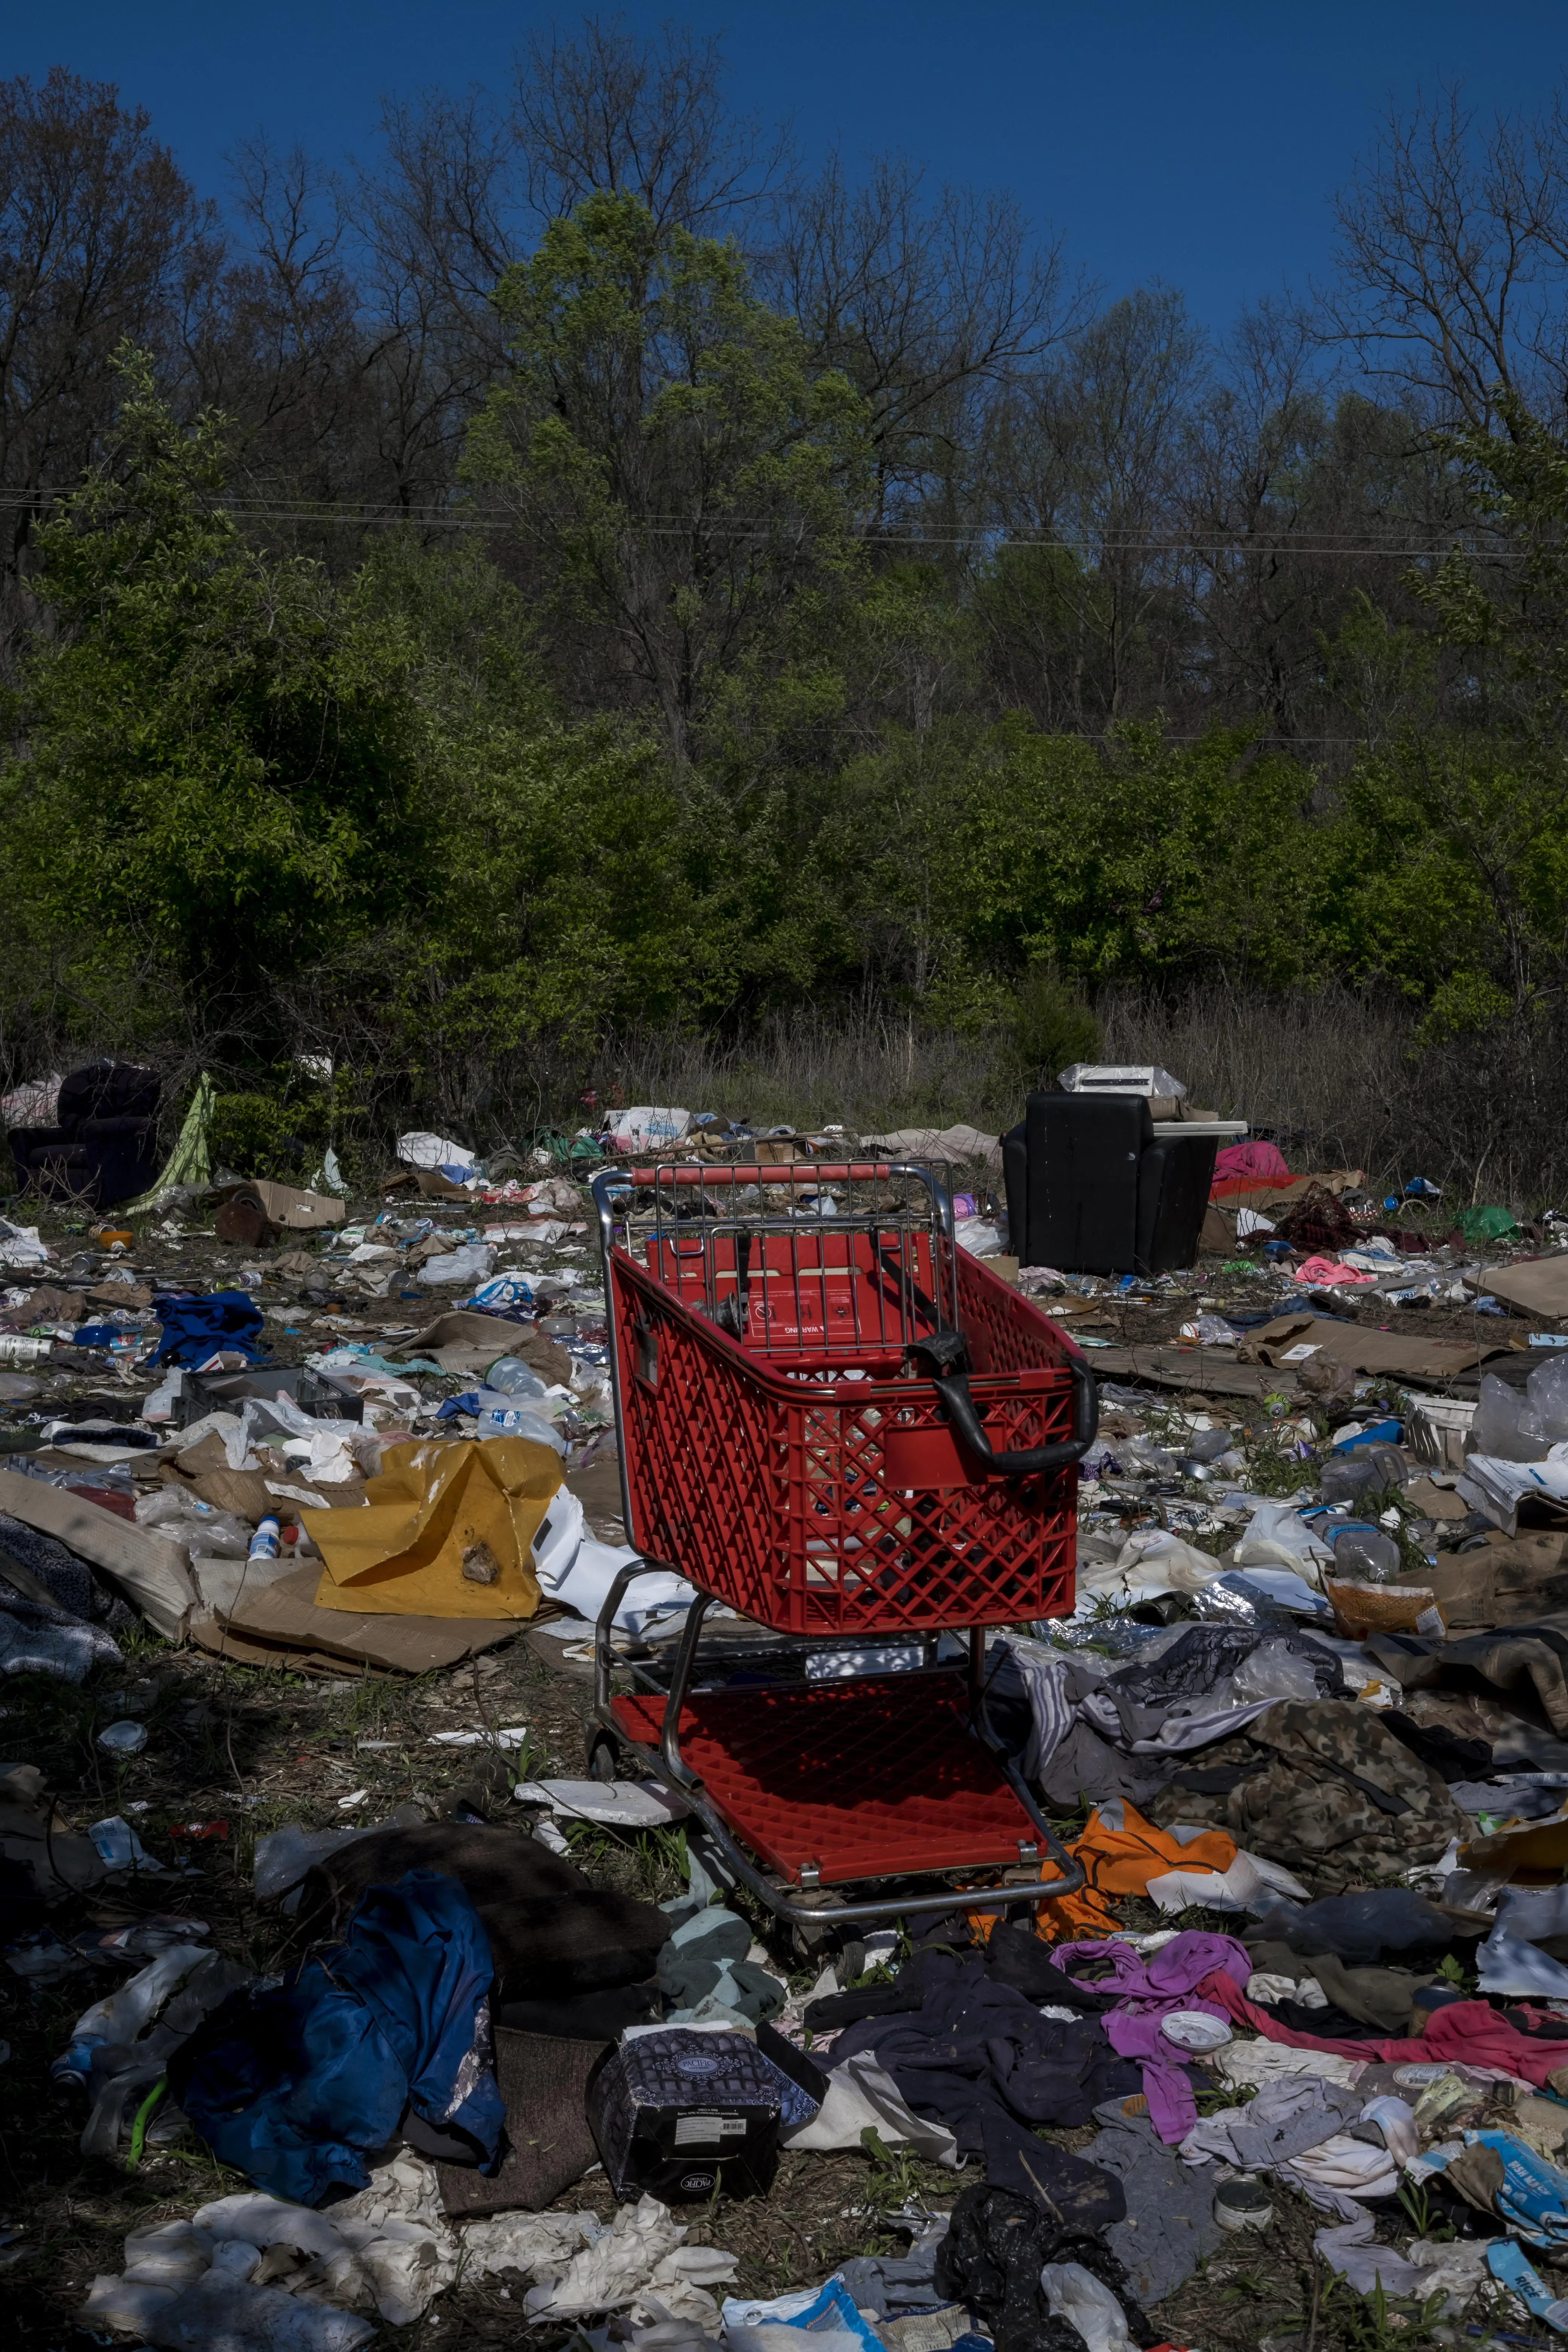 An empty shopping cart is shown outside and atop strewn clothes and debris.